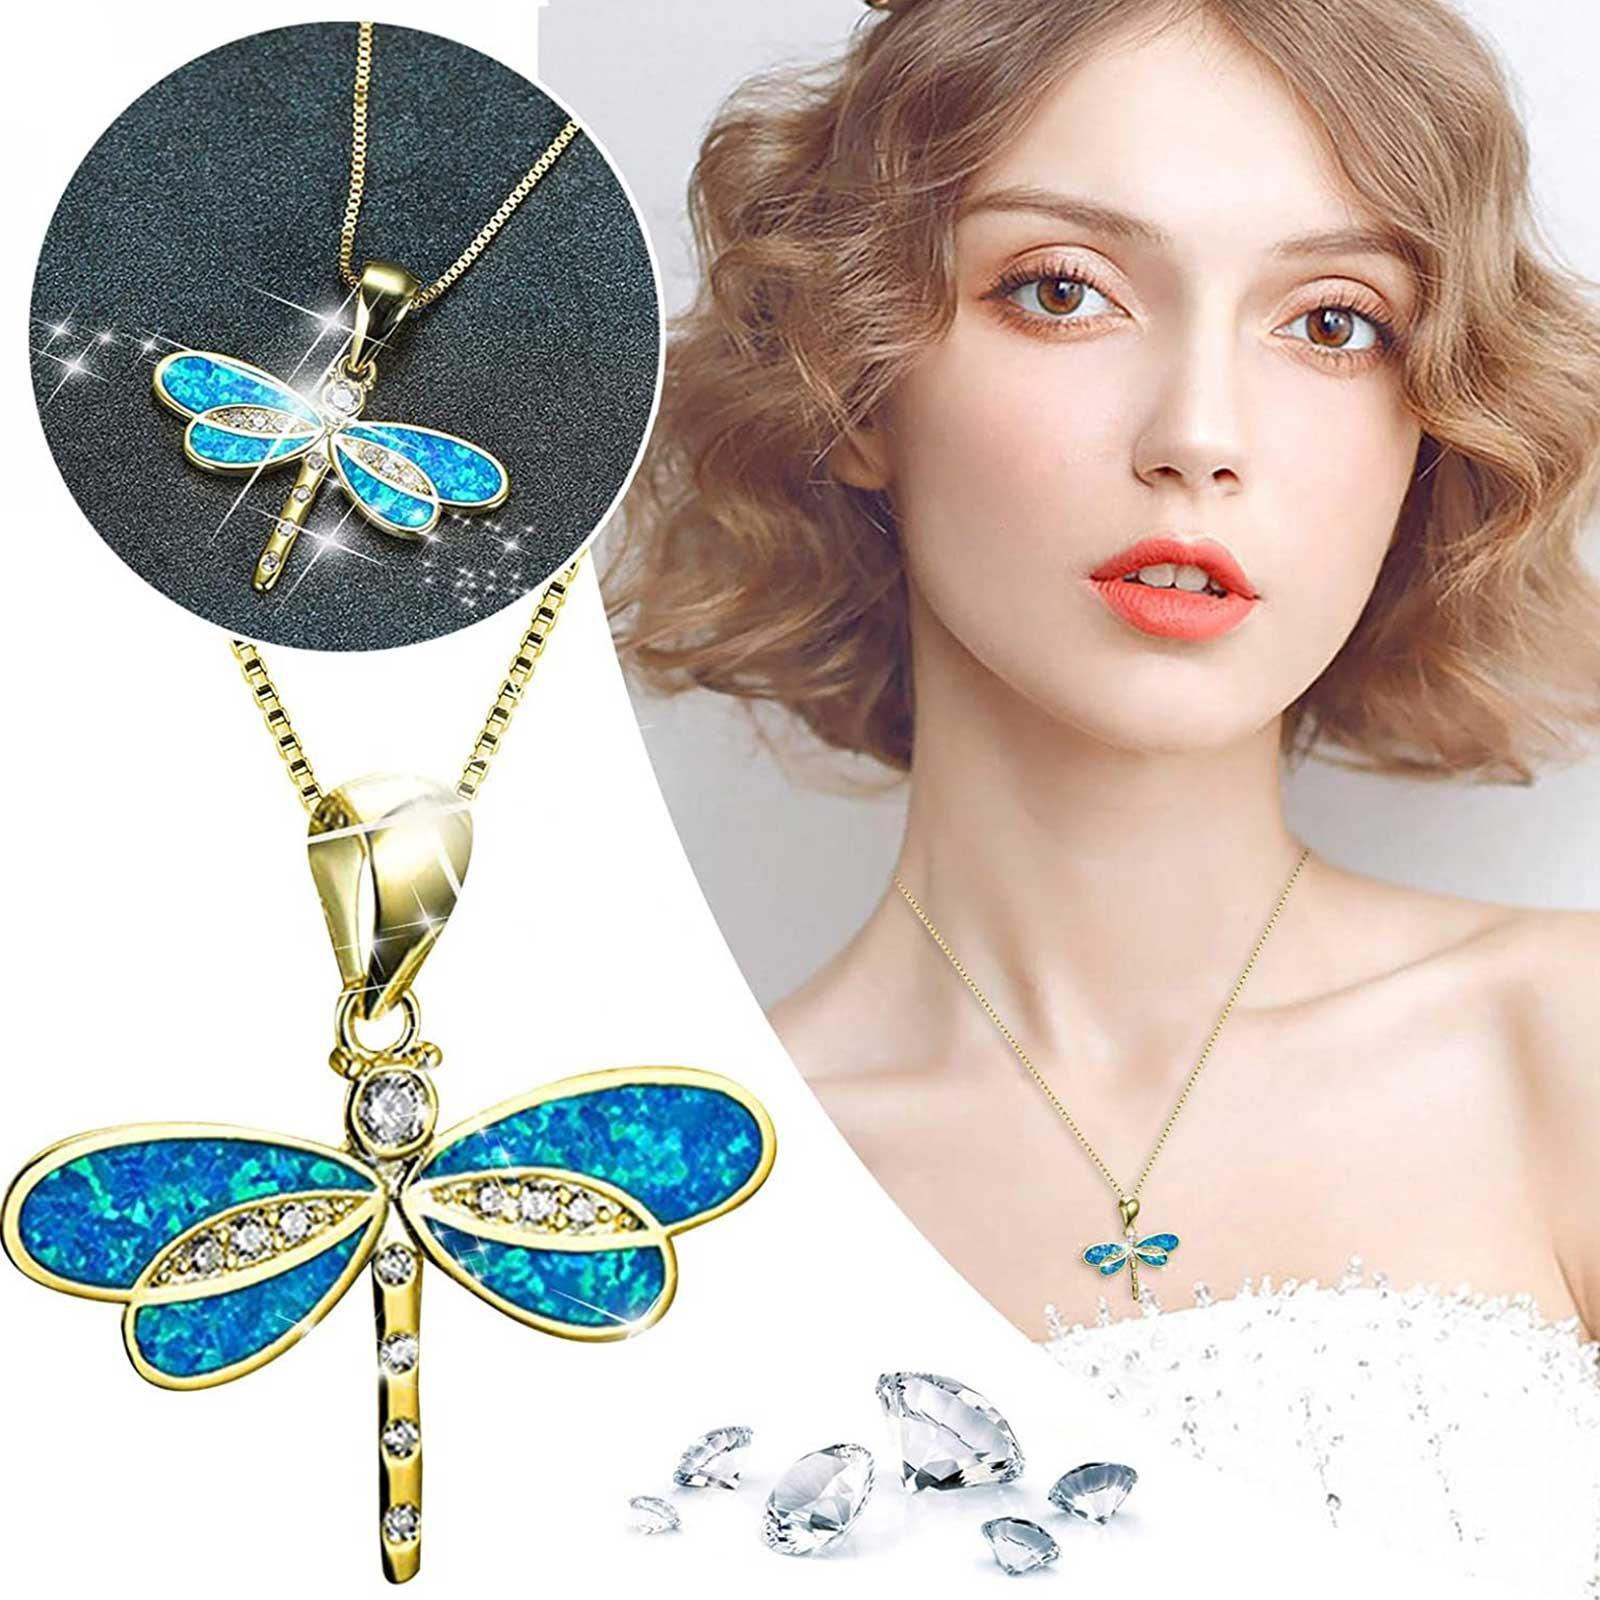 Dragonfly Necklace Pendant Choker For Women Girls Gold Silver White Blue Opal Z0T2 - image 3 of 9